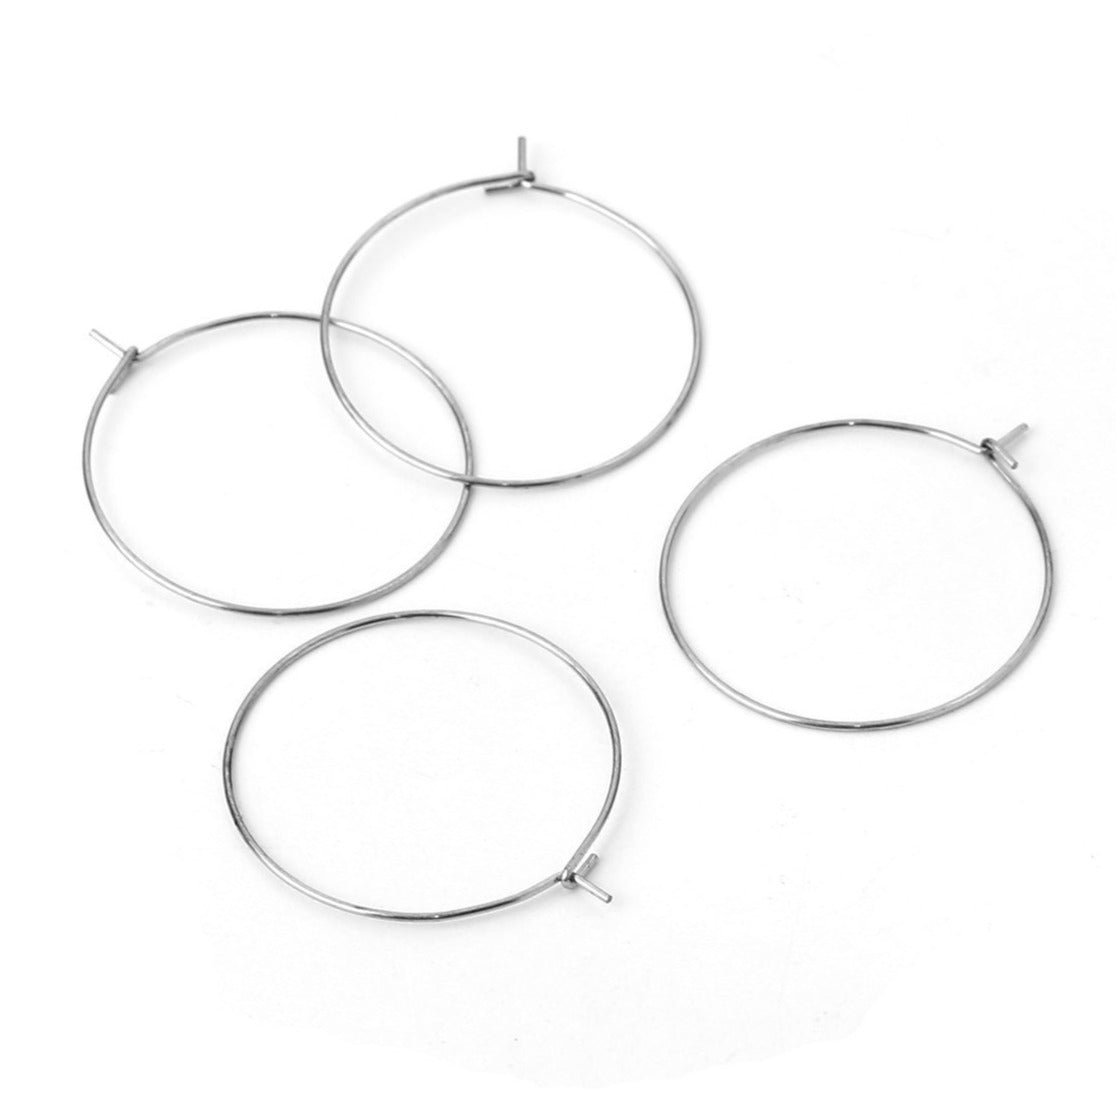 Stainless steel hoops 30pcs (15 pairs) - 5 size available